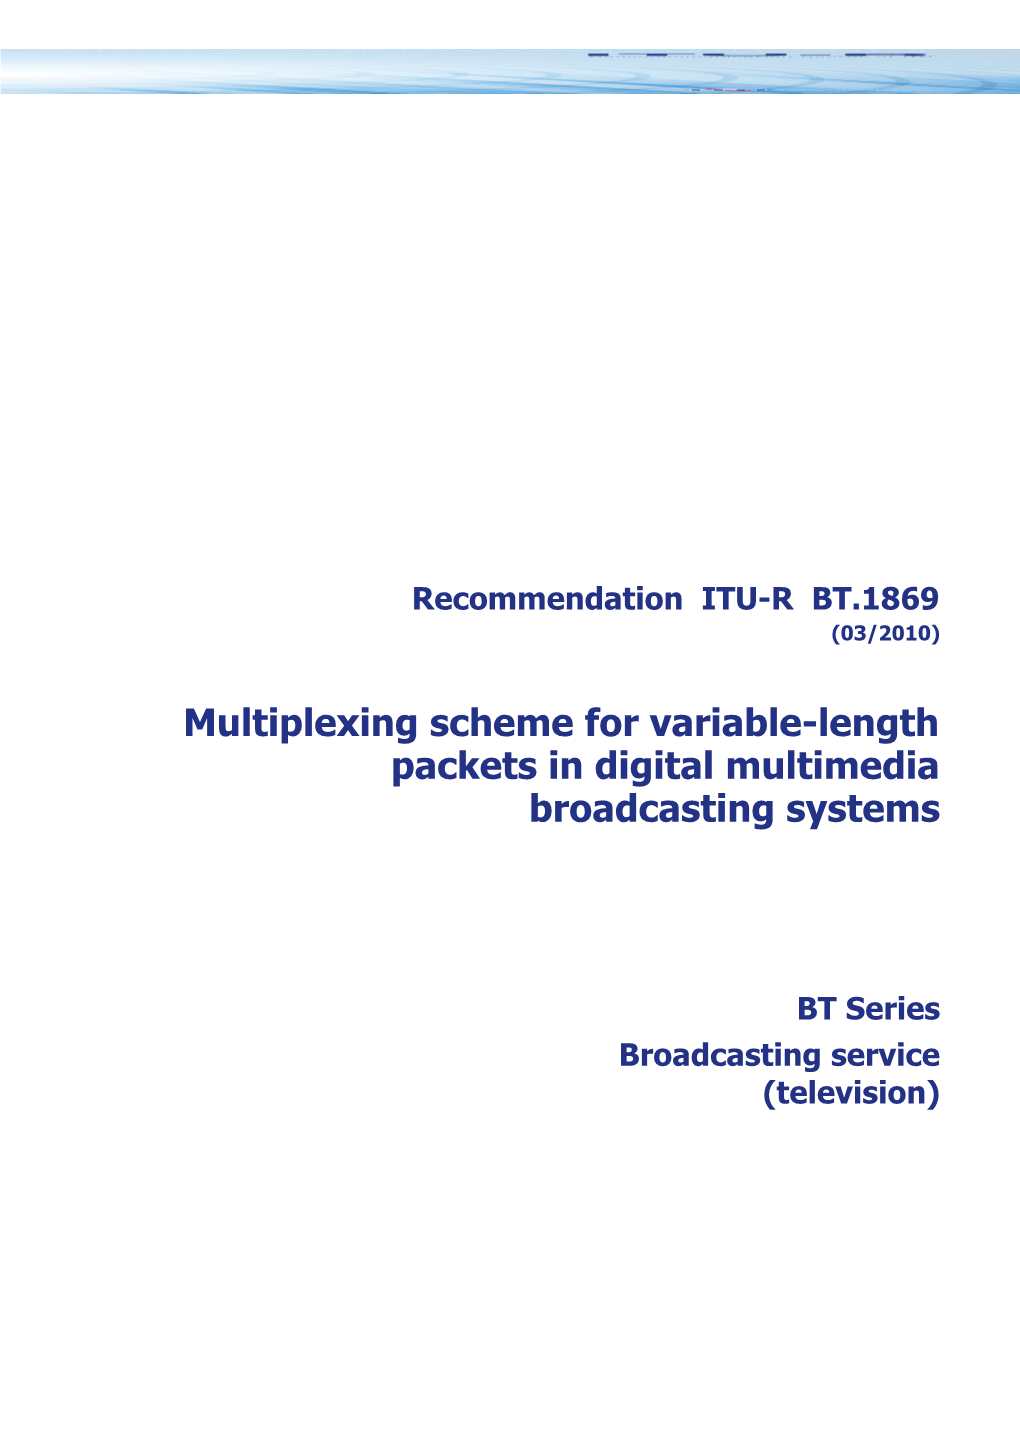 RECOMMENDATION ITU-R BT.1869 - Multiplexing Scheme for Variable-Length Packets in Digital